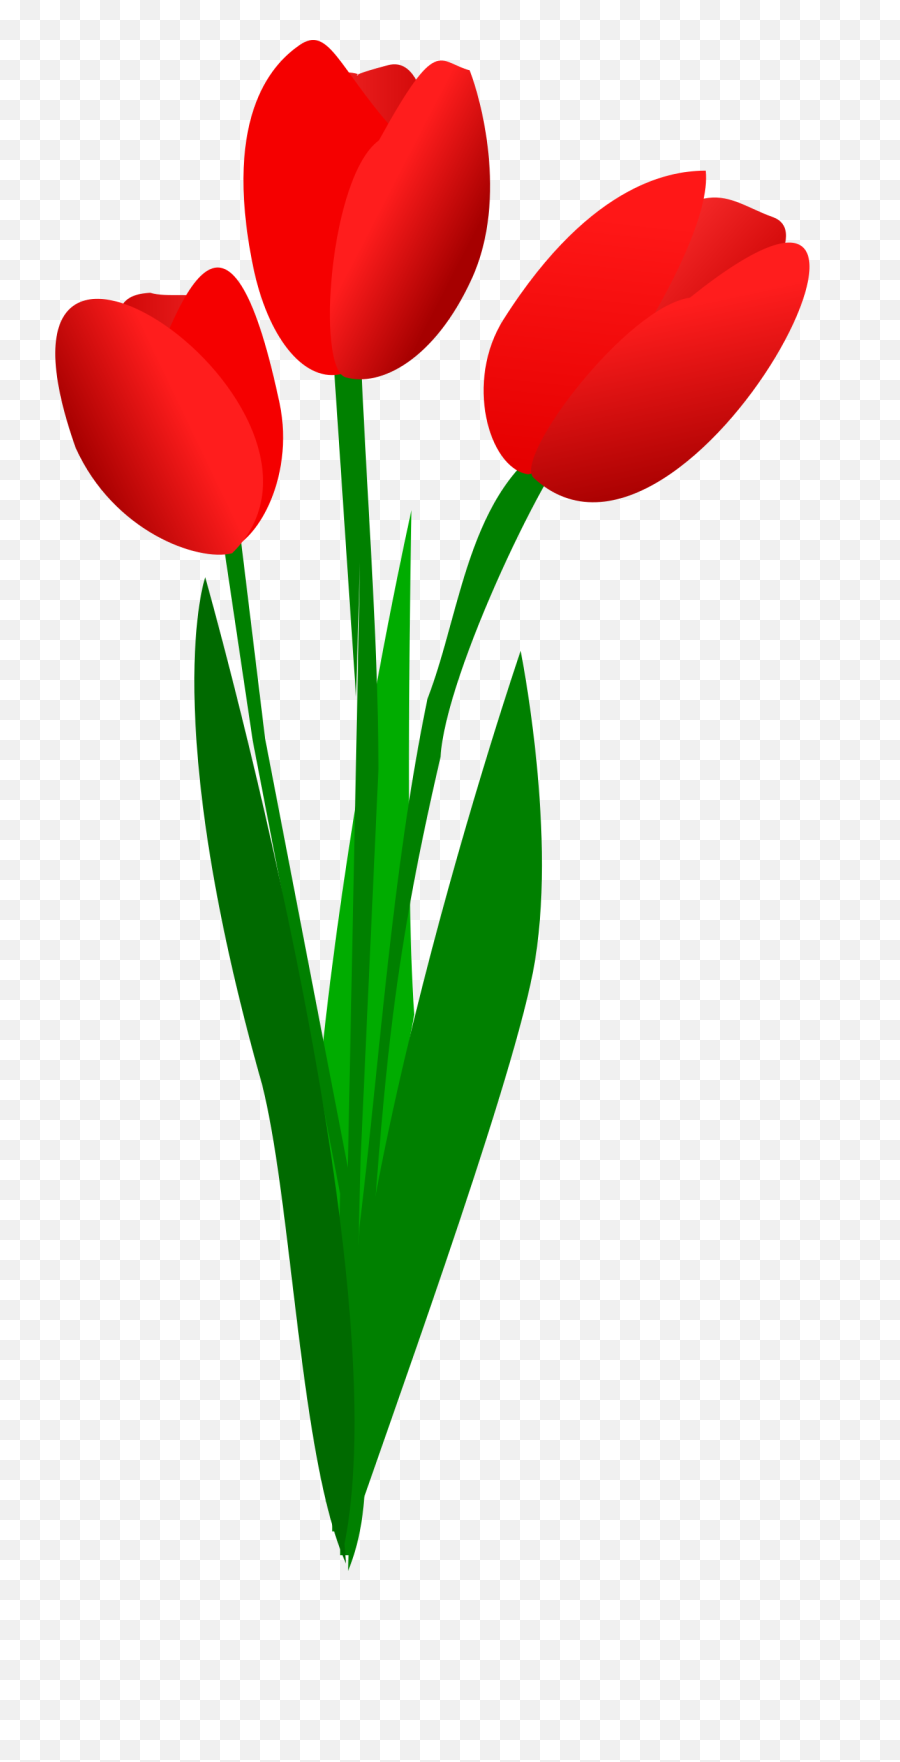 Tulip Png Free Download 30 Images - Tulips Clipart,Tulip Png